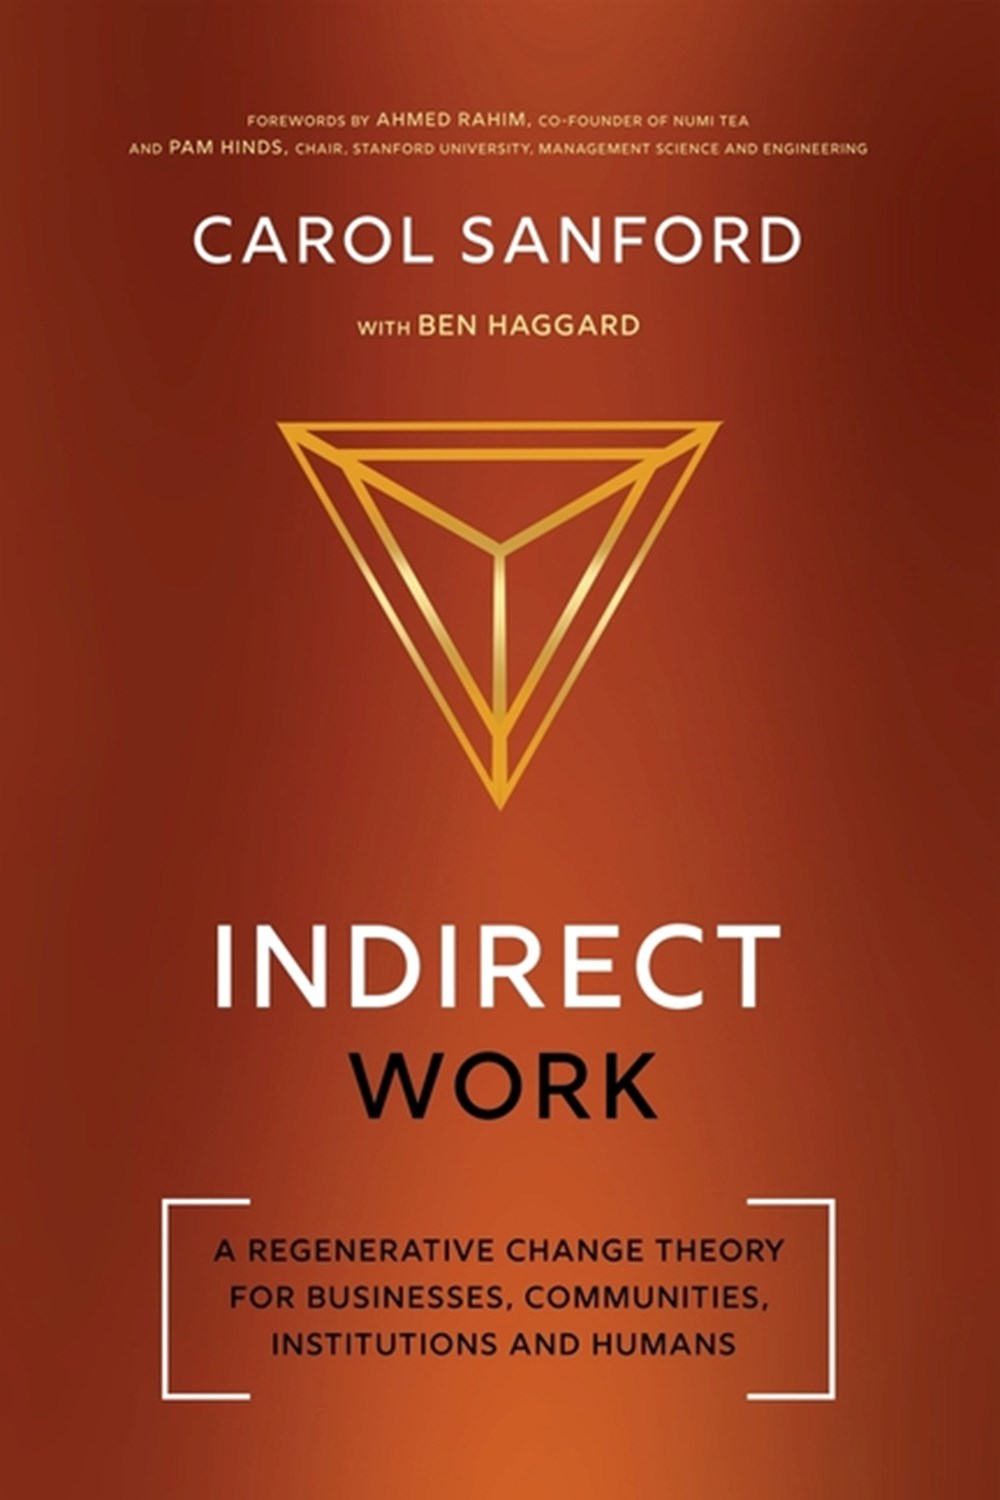 Indirect Work A Regenerative Change Theory for Businesses, Communities, Institutions and Humans